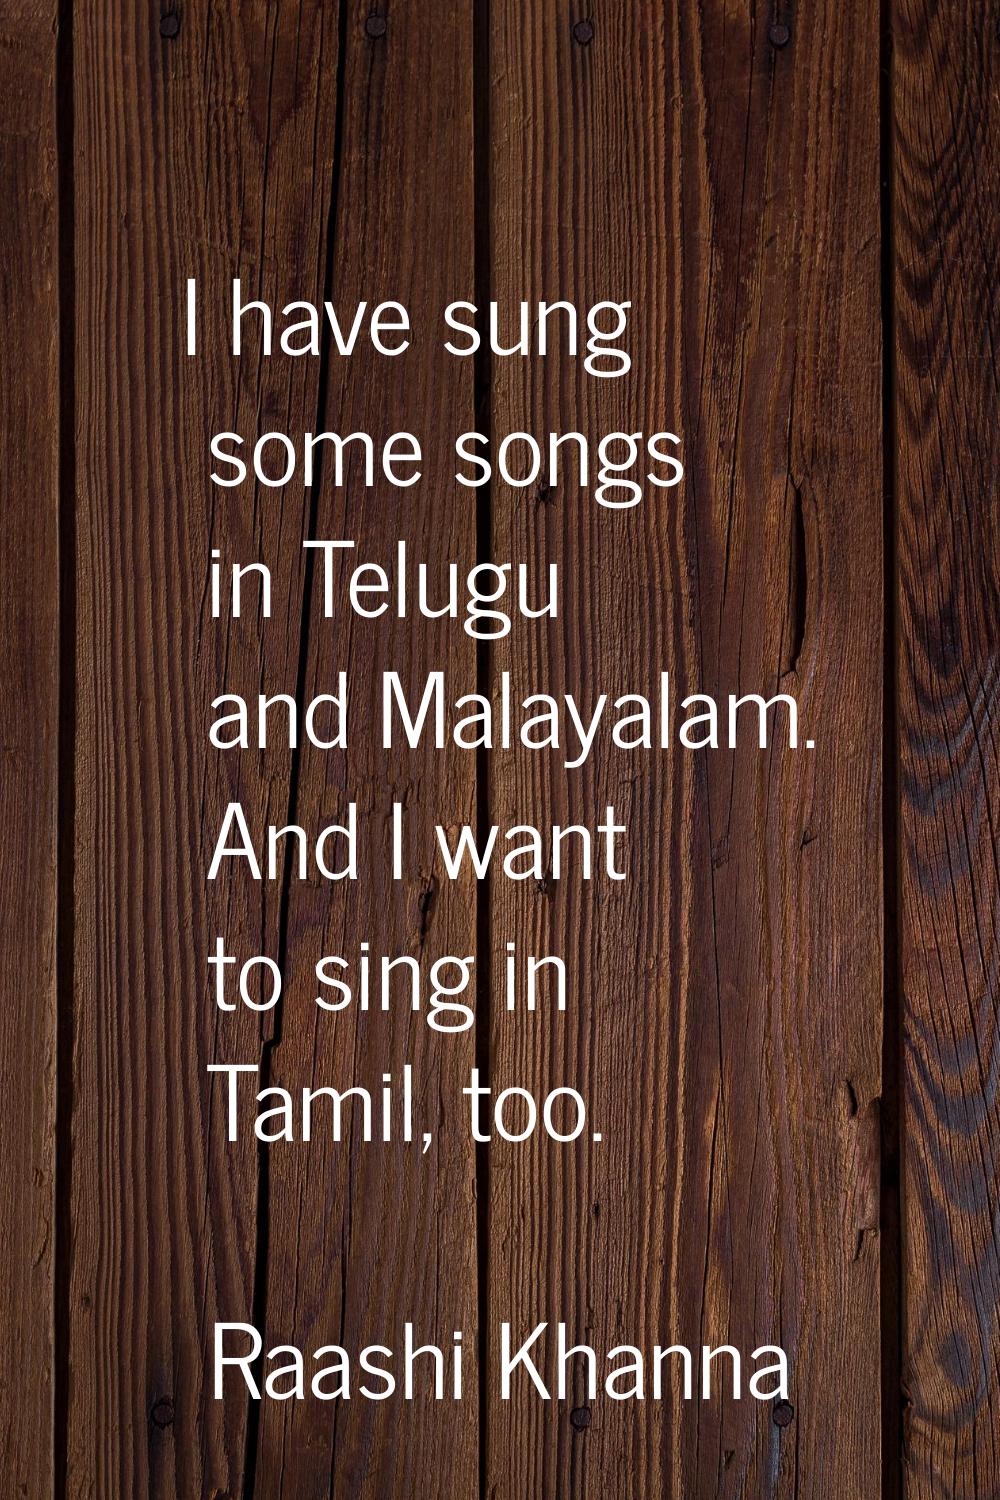 I have sung some songs in Telugu and Malayalam. And I want to sing in Tamil, too.